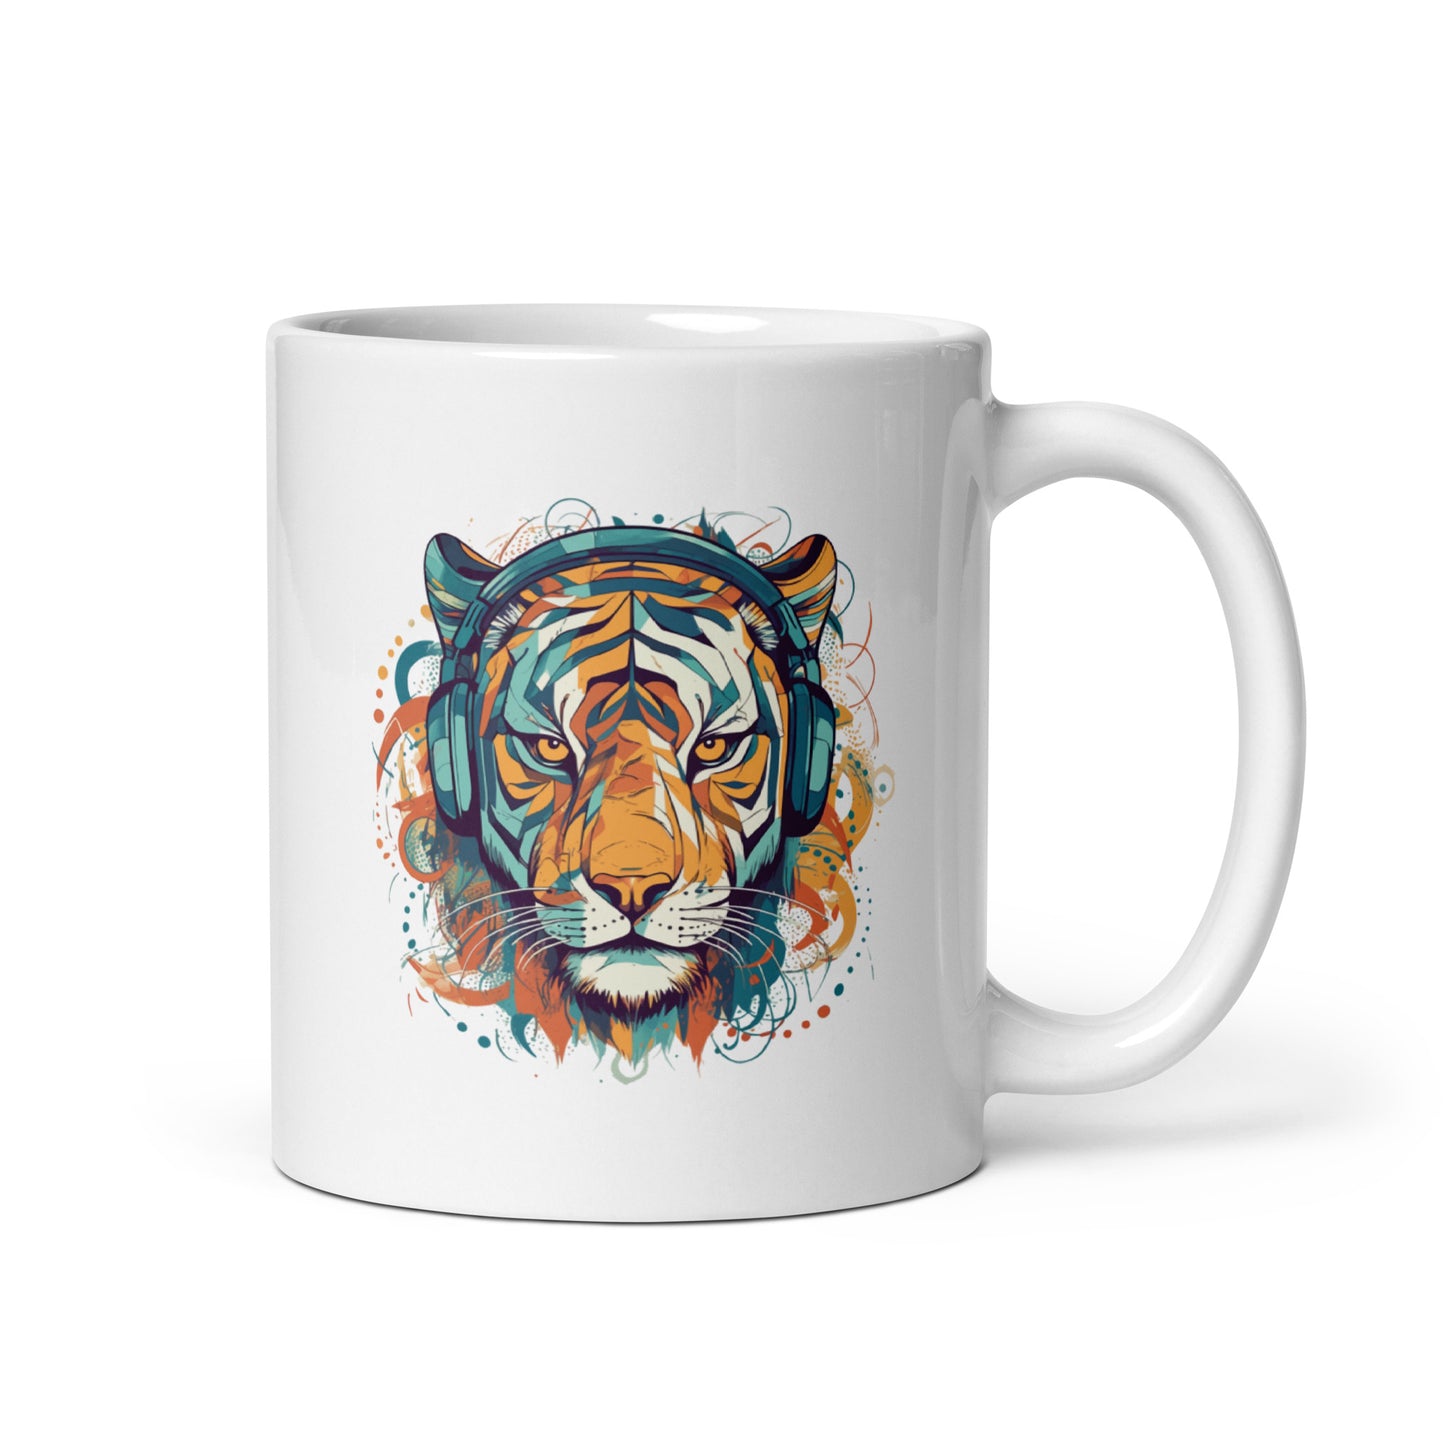 Fantastic portrait of tiger, Tiger colorful illustration in headphones, Music and animals - White glossy mug